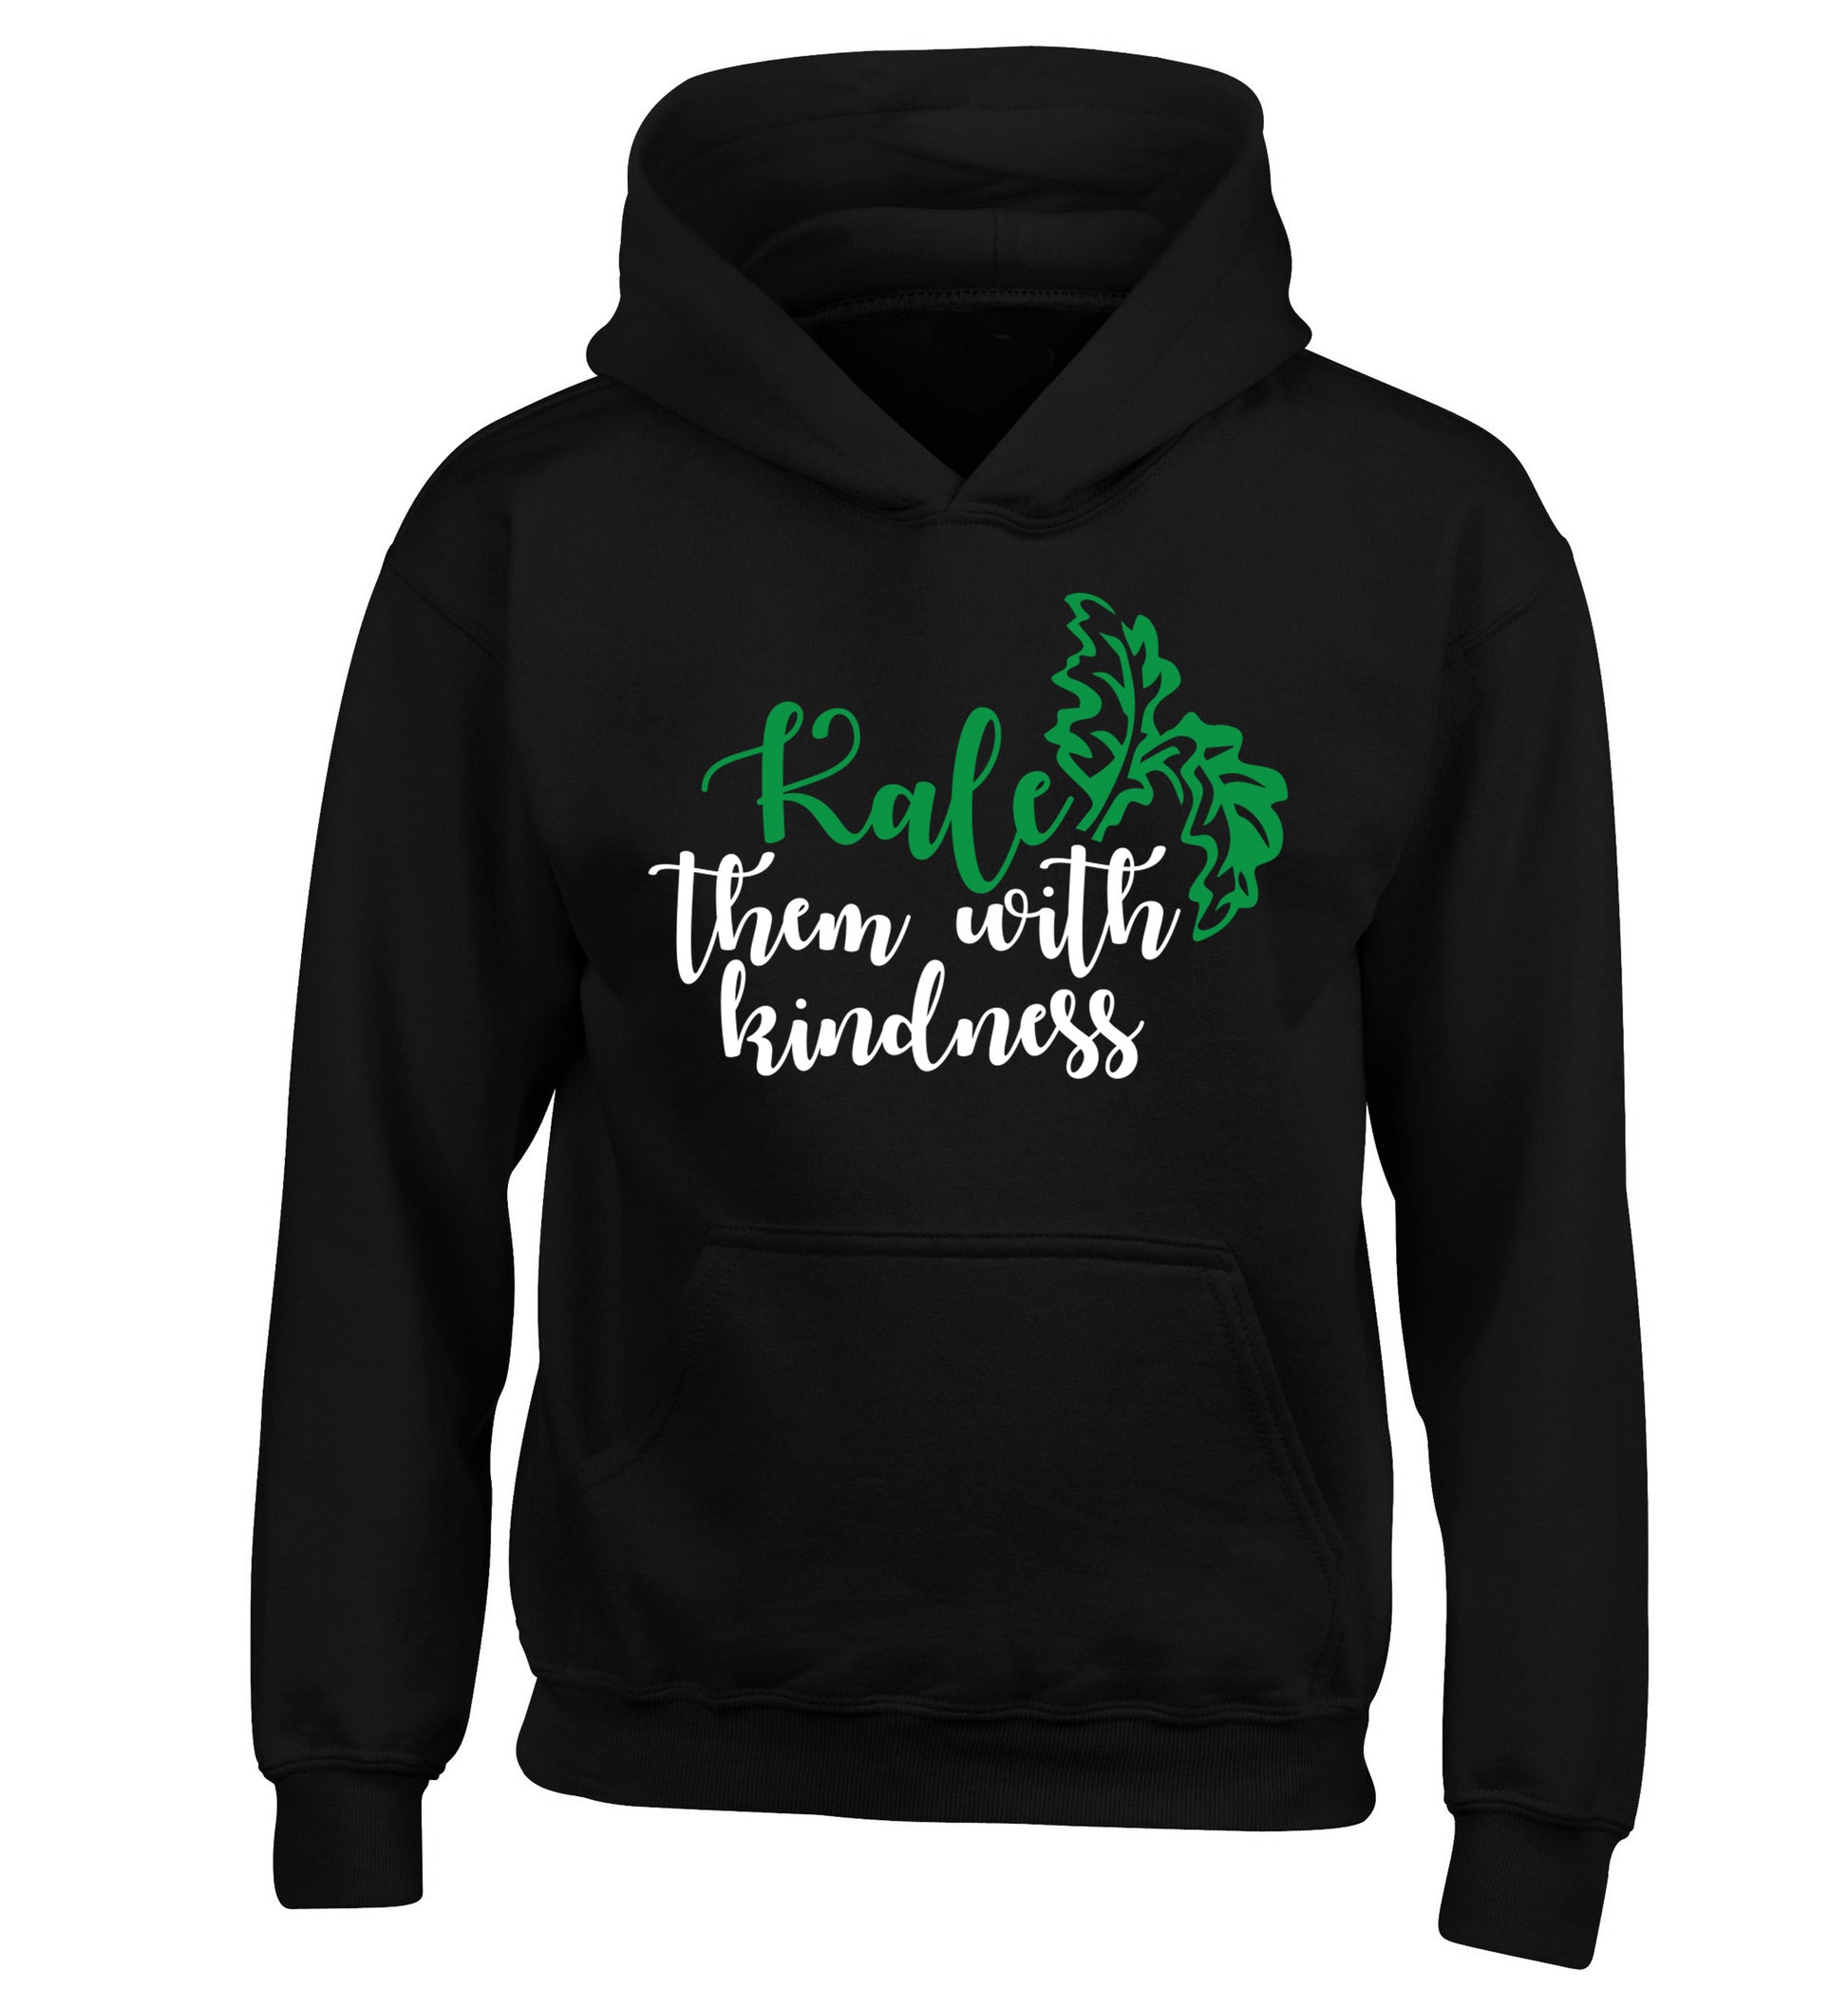 Kale them with kindness children's black hoodie 12-14 Years